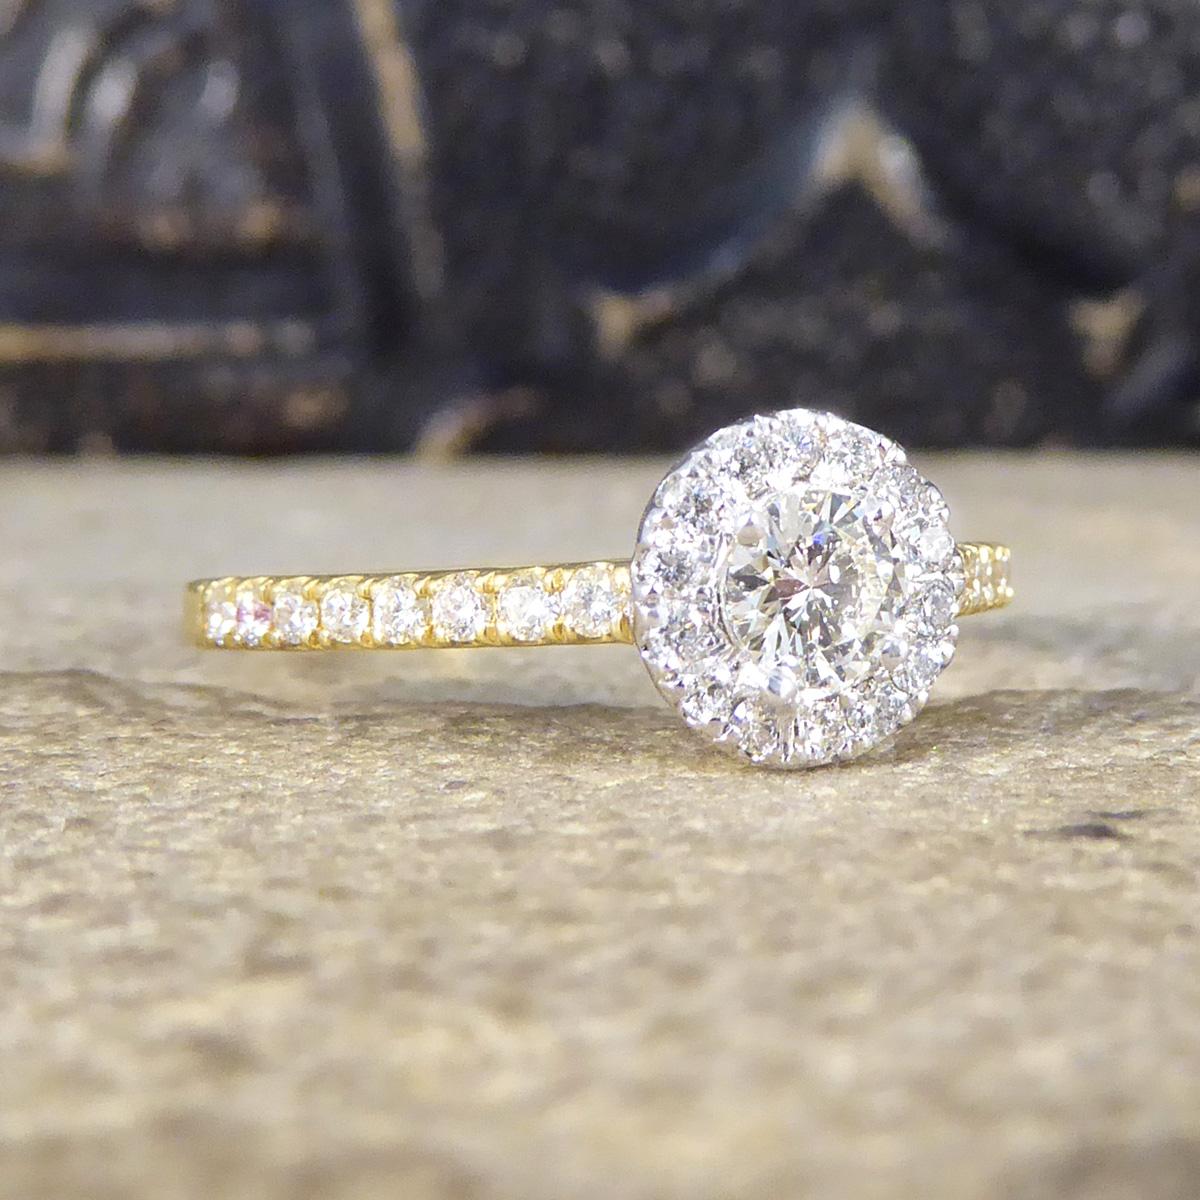 The perfect sparkly engagement ring. This ring features a Diamond in the centre weighing 0.22ct with a cluster of smaller Diamonds surrounding it set with the illusion of a larger Diamond, giving extra sparkle in an 18ct White Gold setting on the